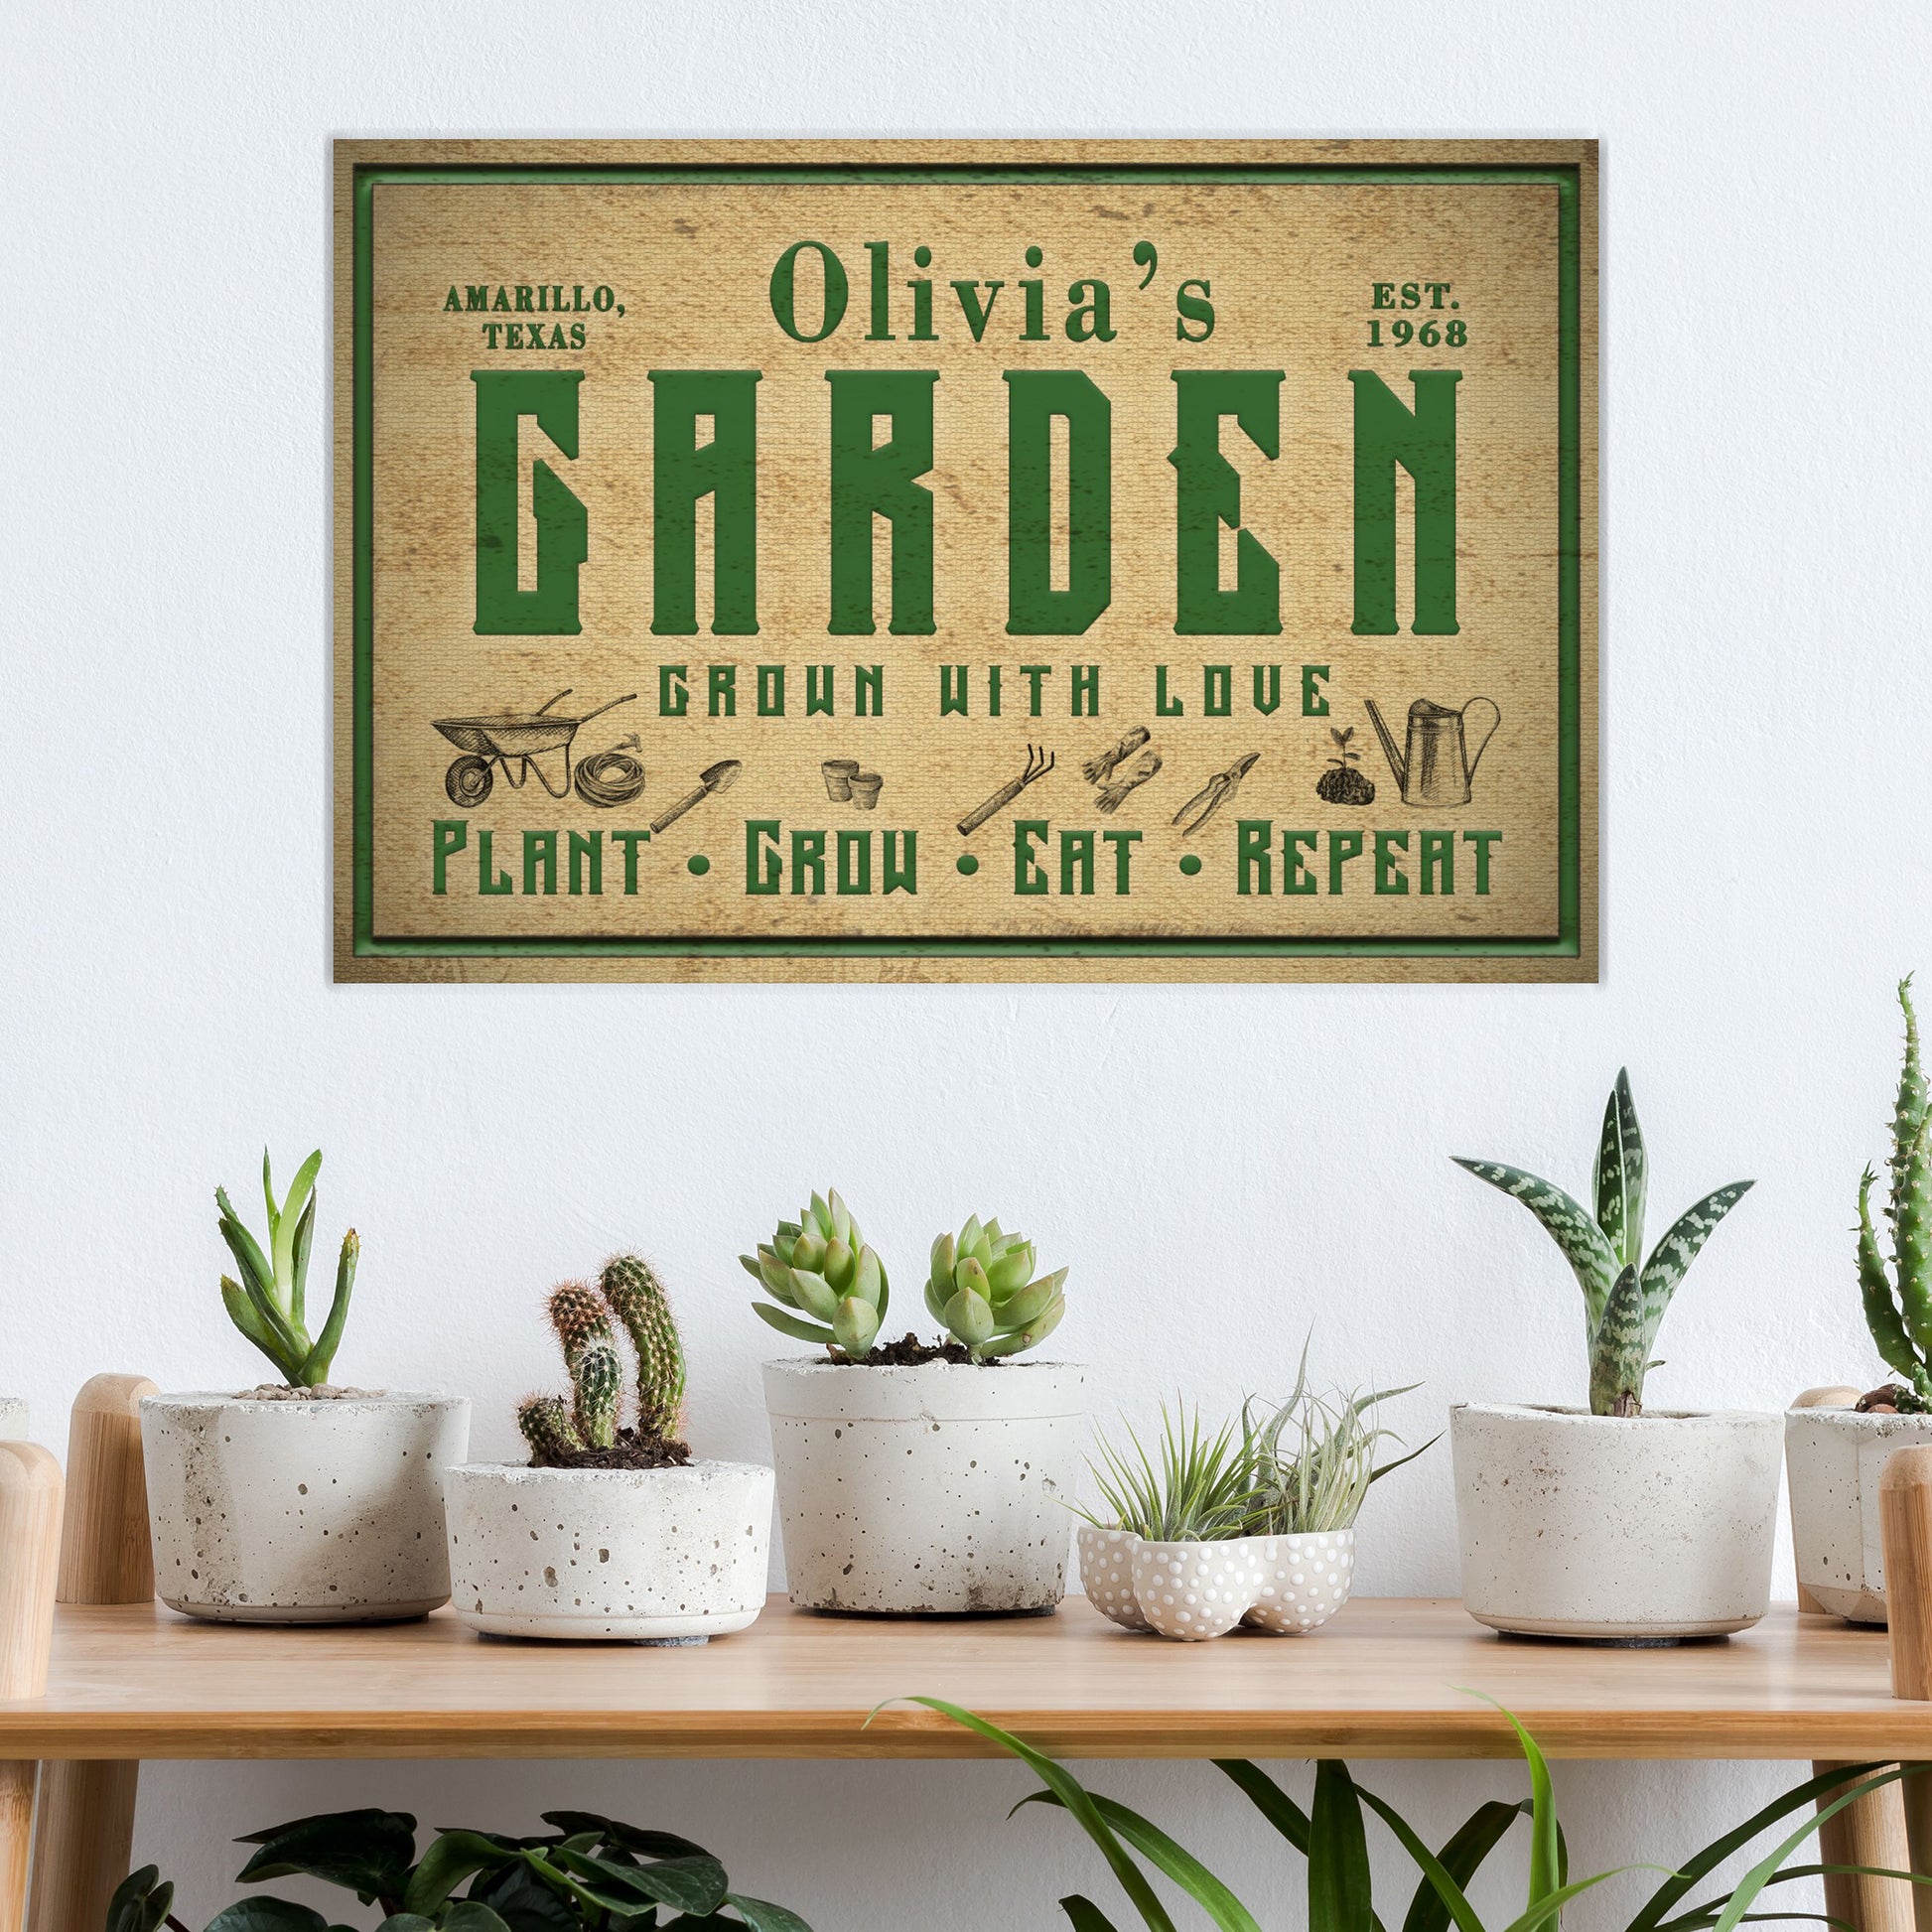 Plant, Grow, Eat, Repeat Garden Sign - Image by Tailored Canvases